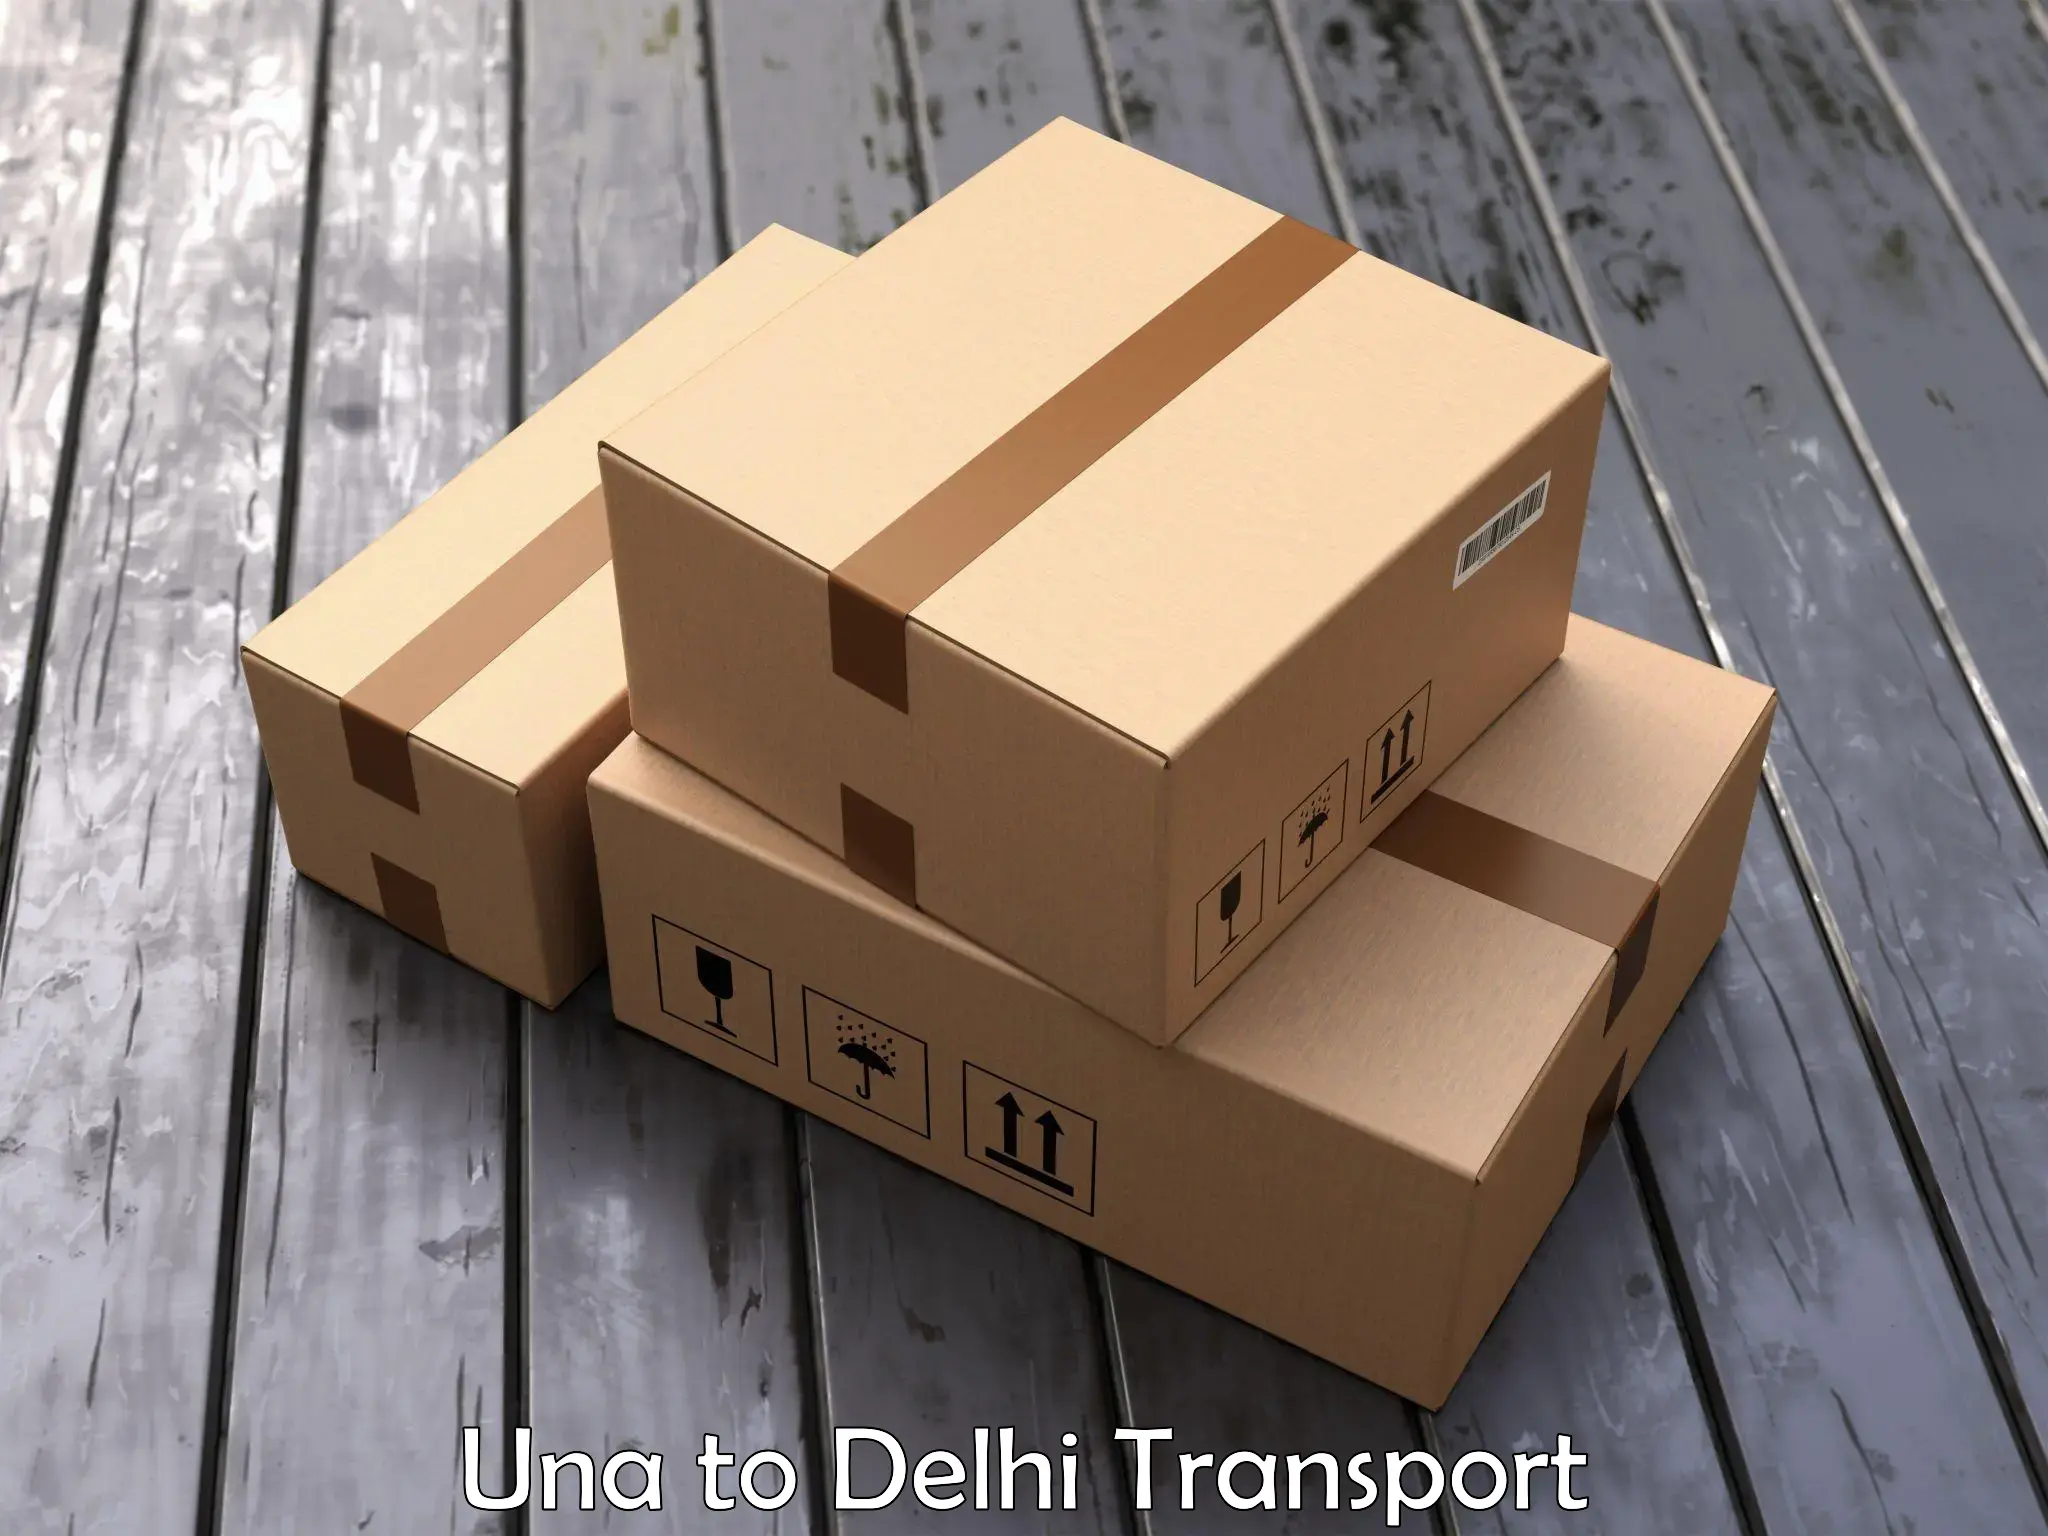 Daily parcel service transport Una to Lodhi Road